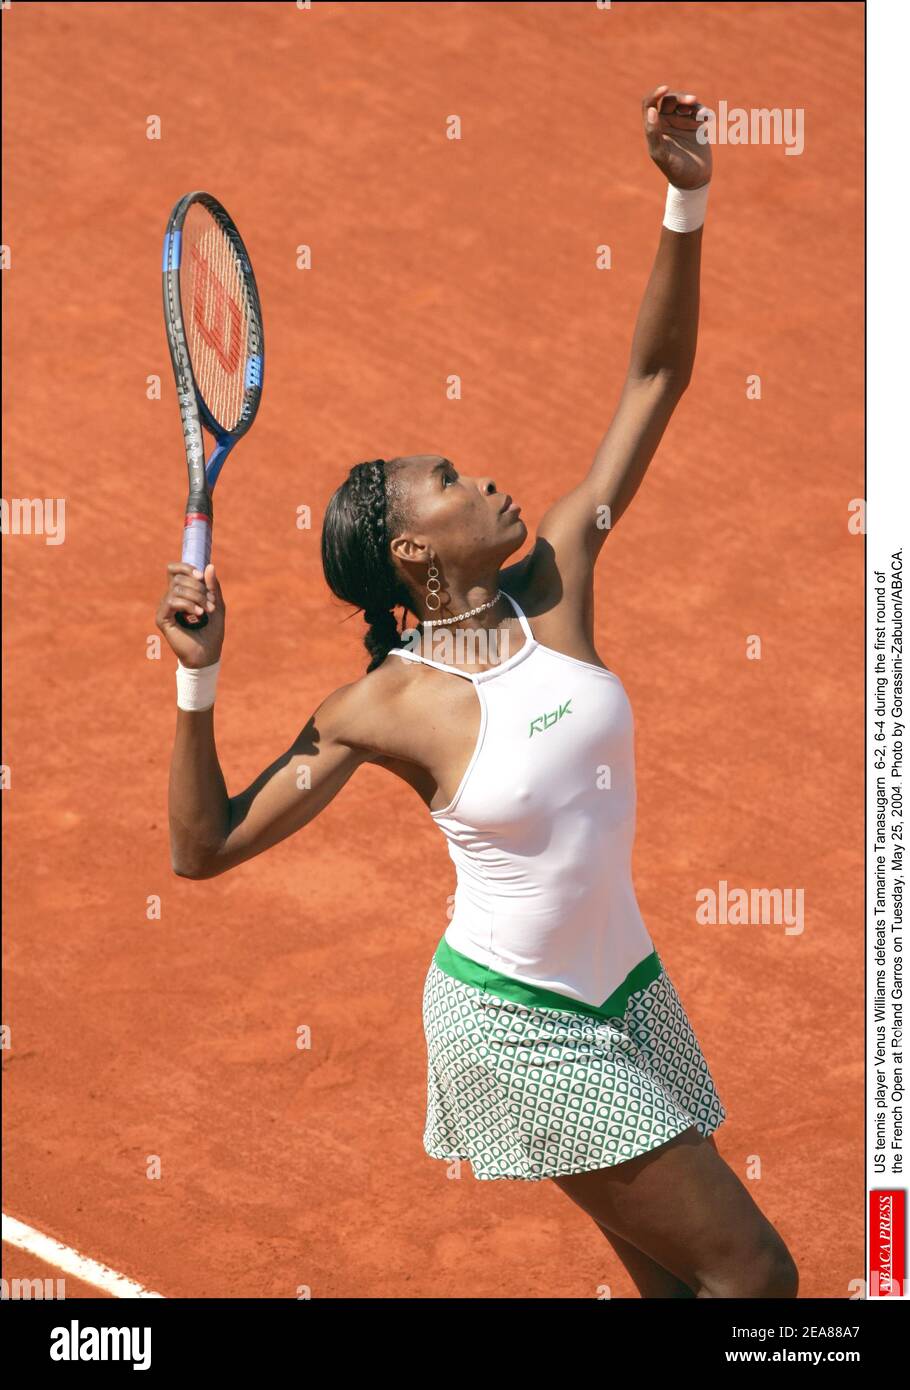 US tennis player Venus Williams defeats Tamarine Tanasugarn 6-2, 6-4 during the first round of the French Open at Roland Garros on Tuesday, May 25, 2004. Photo by Gorassini-Zabulon/ABACA. Stock Photo